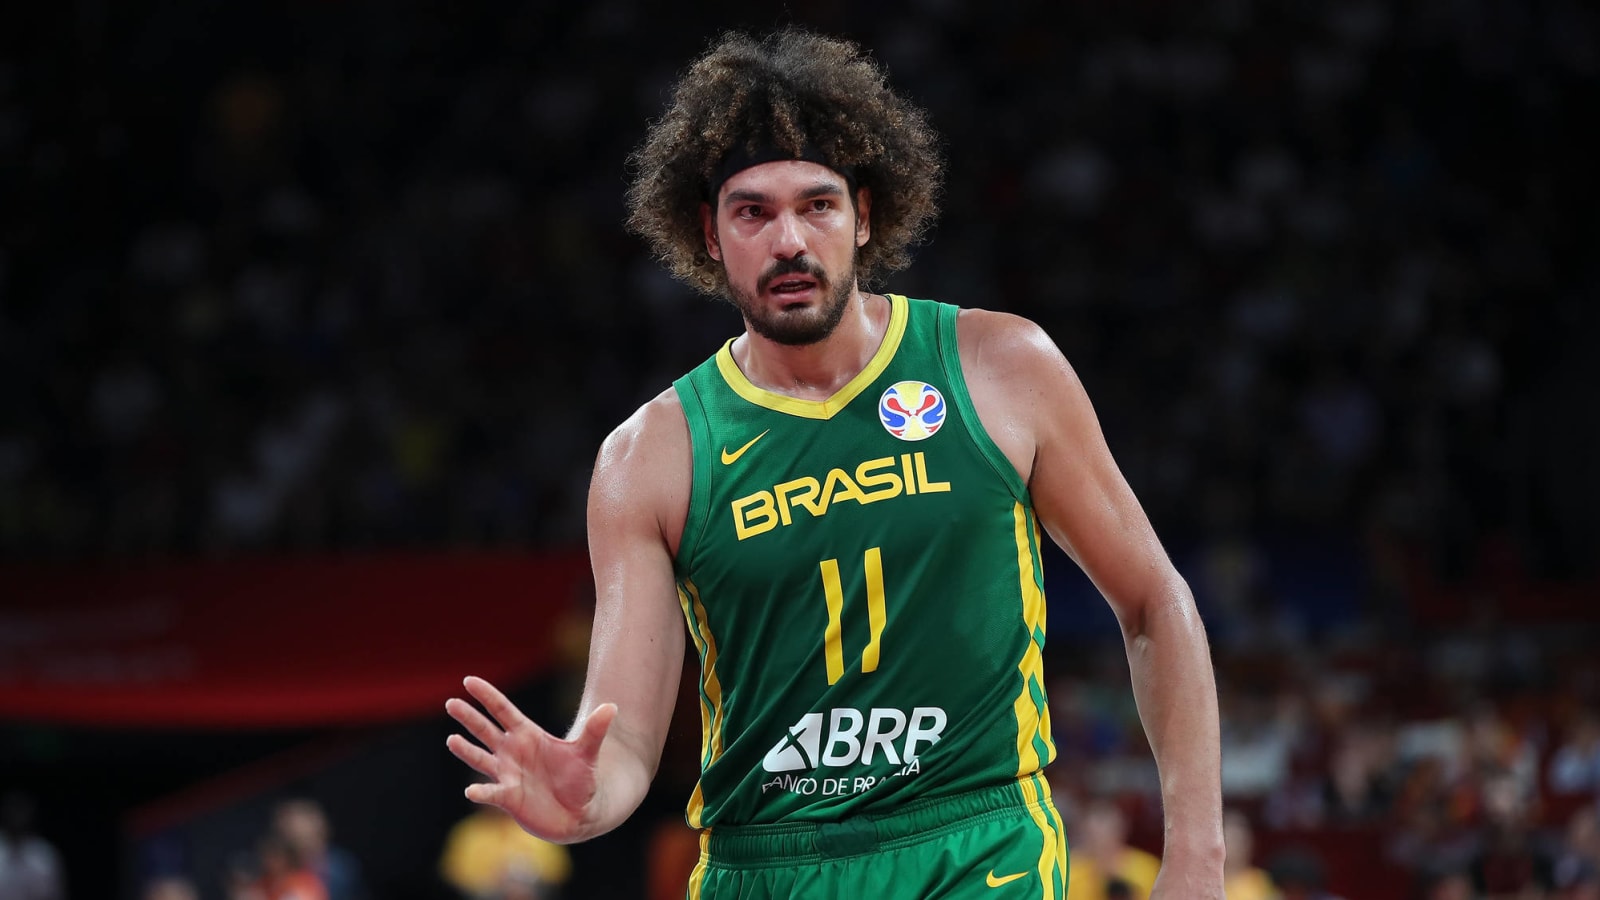 Anderson Varejao, out of NBA since 2017, signs 10-day contract